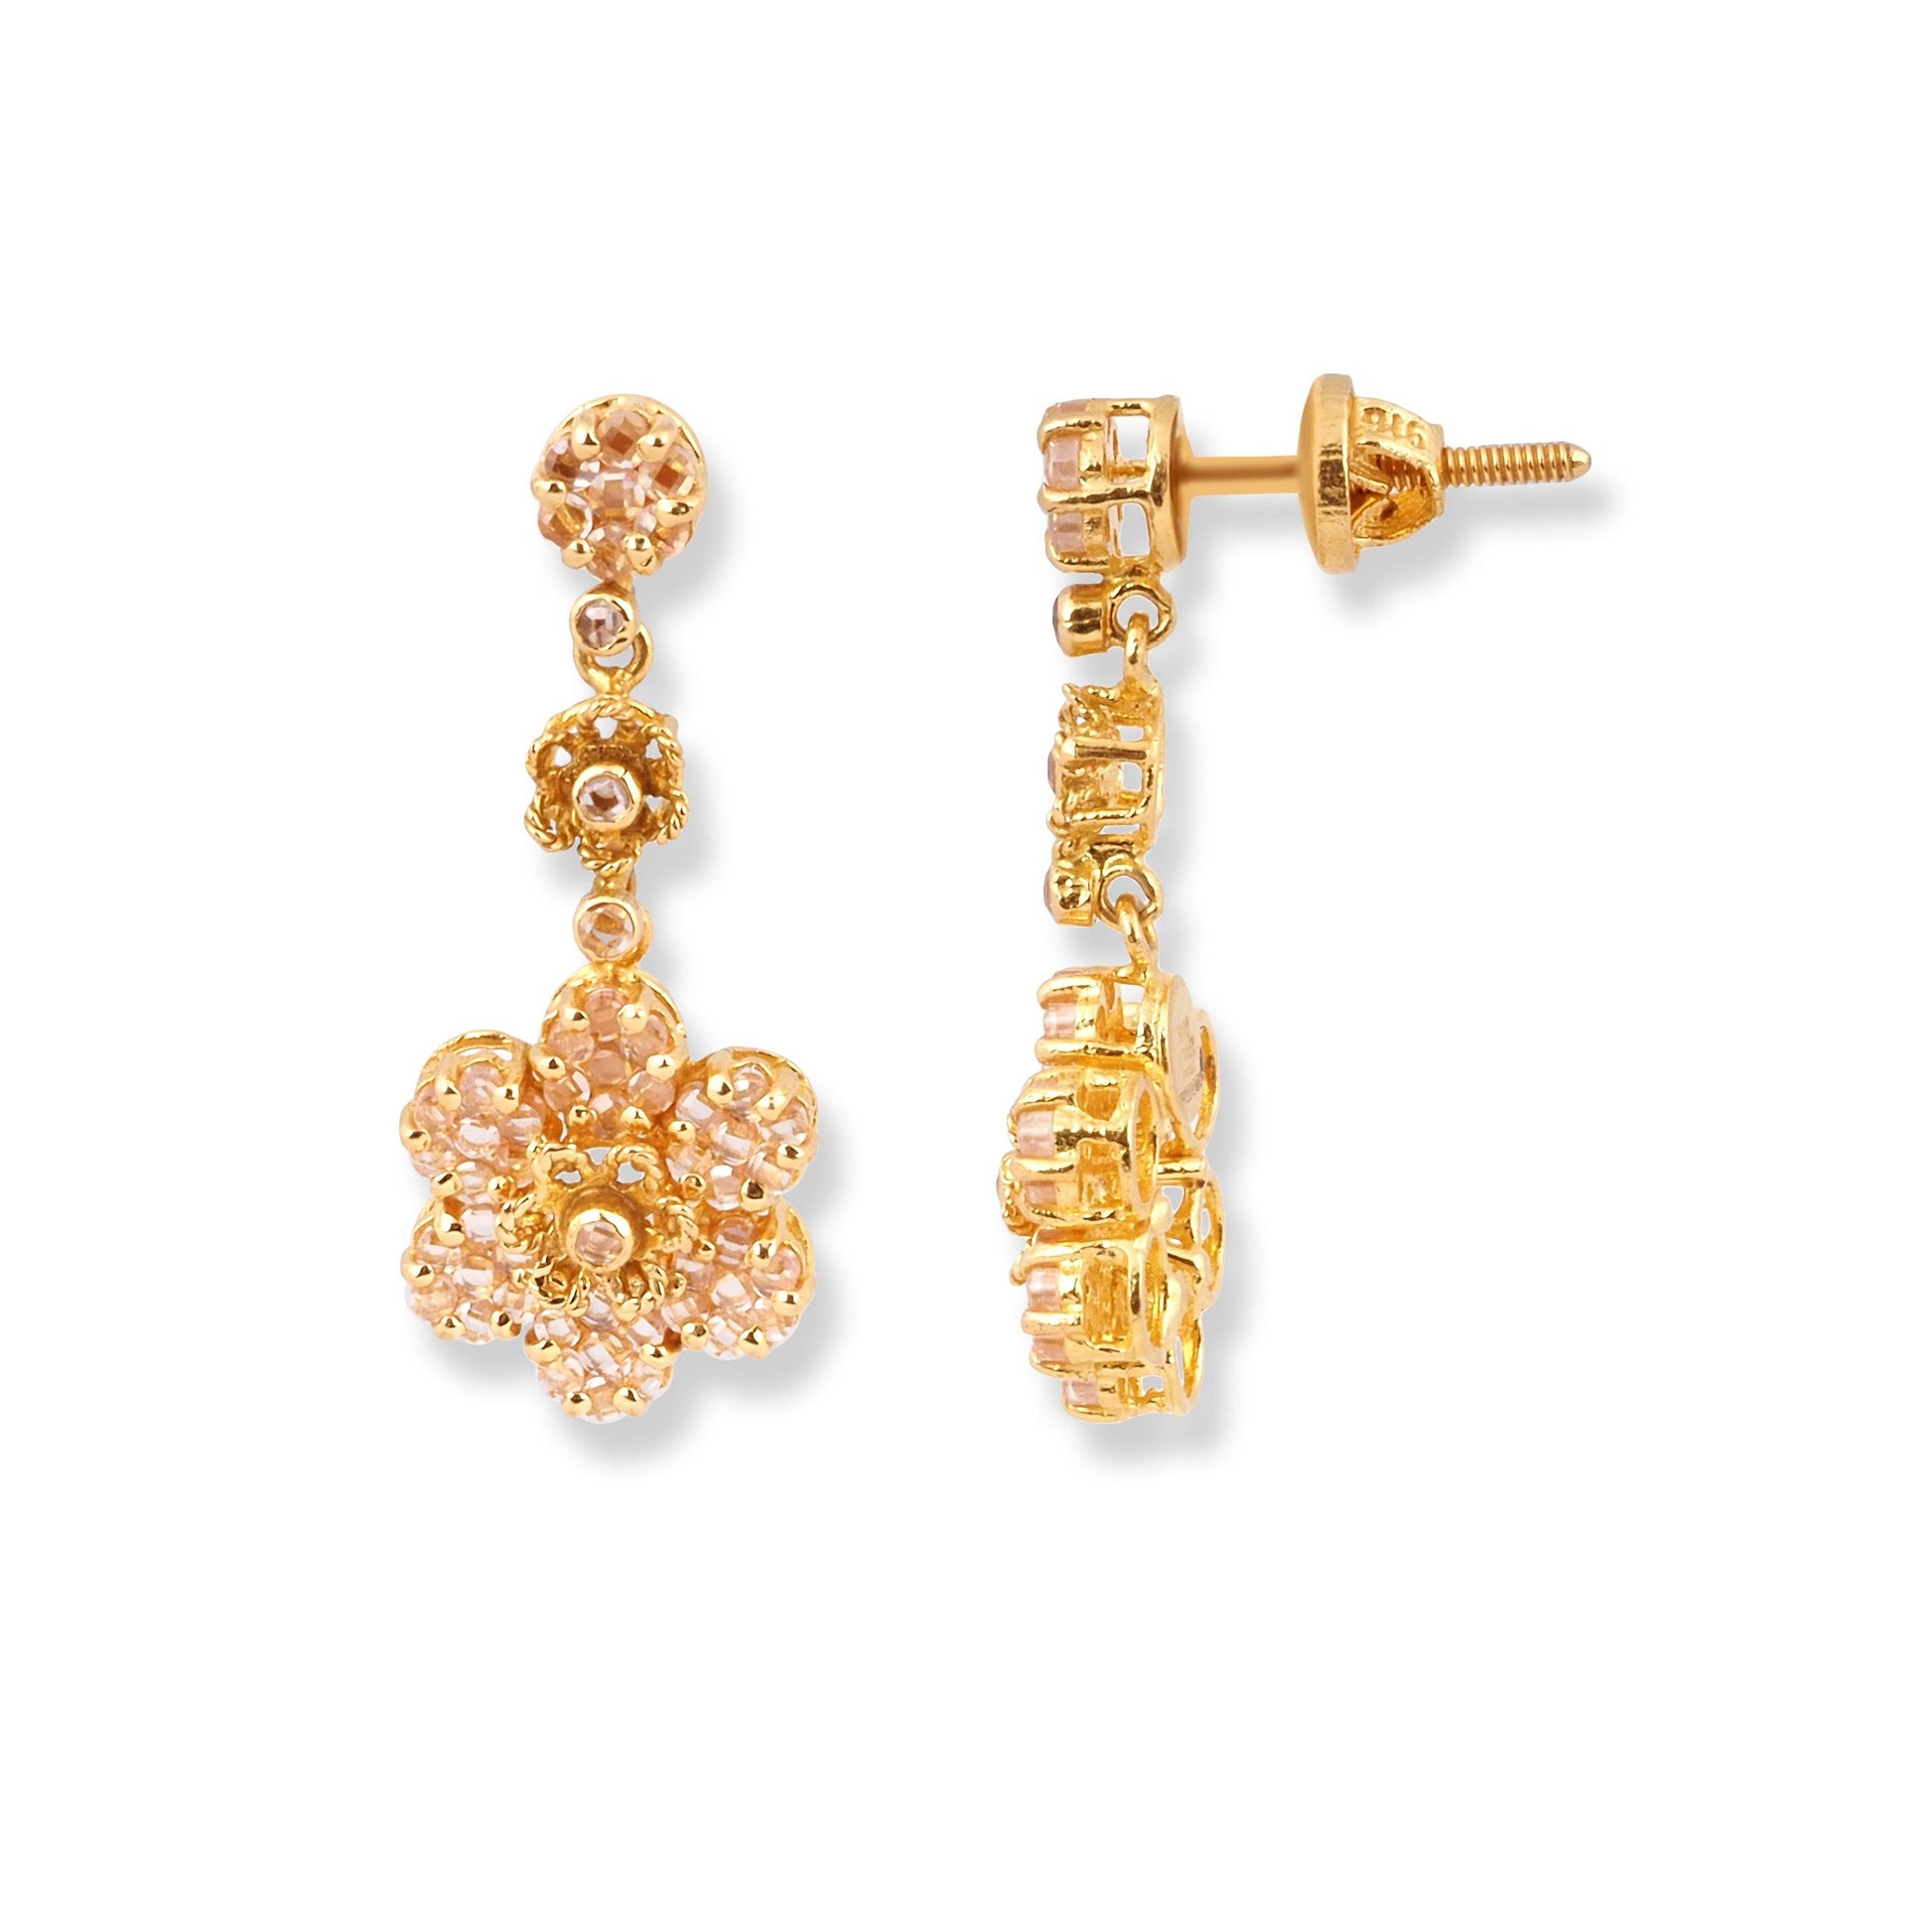 22ct Yellow Gold Necklace & Earrings with Polki Style Cubic Zirconias NE-7058 - Minar Jewellers